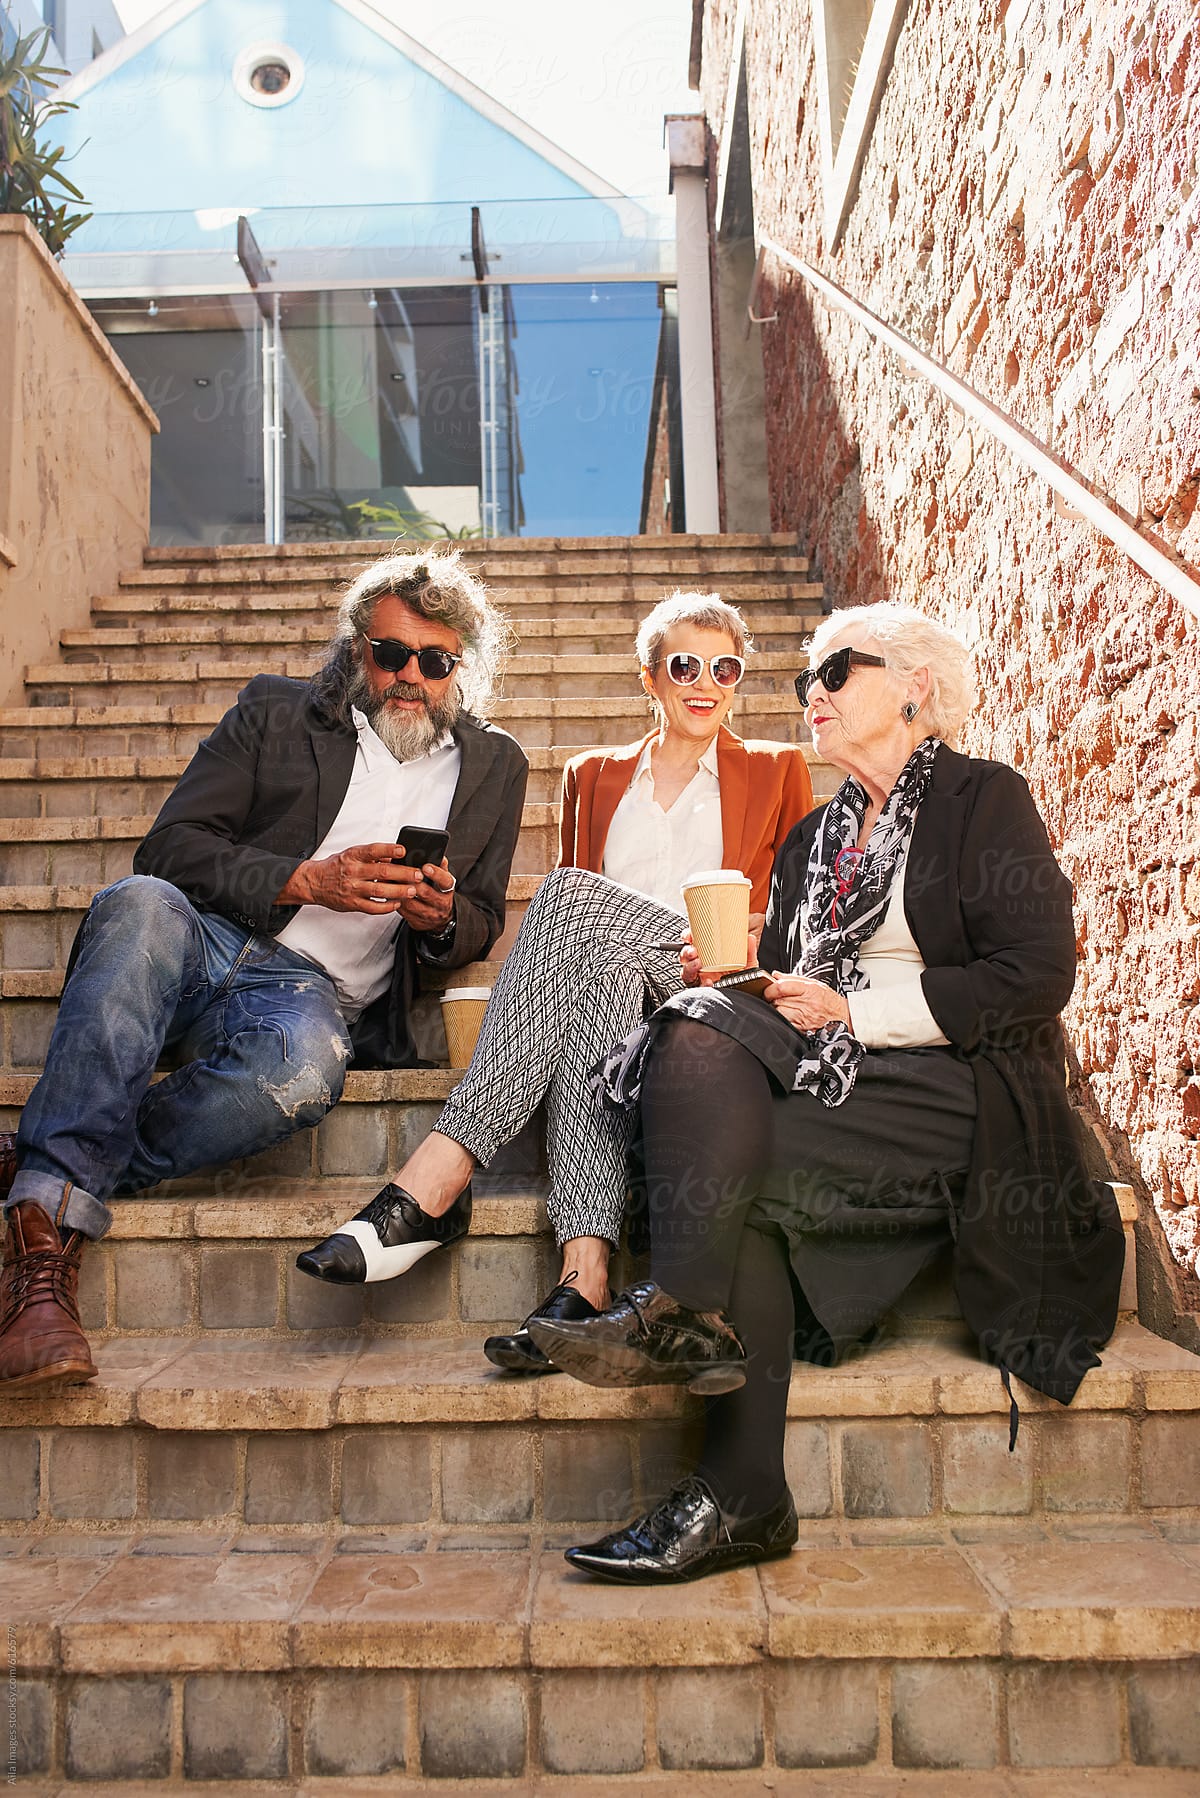 Three old friends enjoying the sun on the steps using digital tablet technology